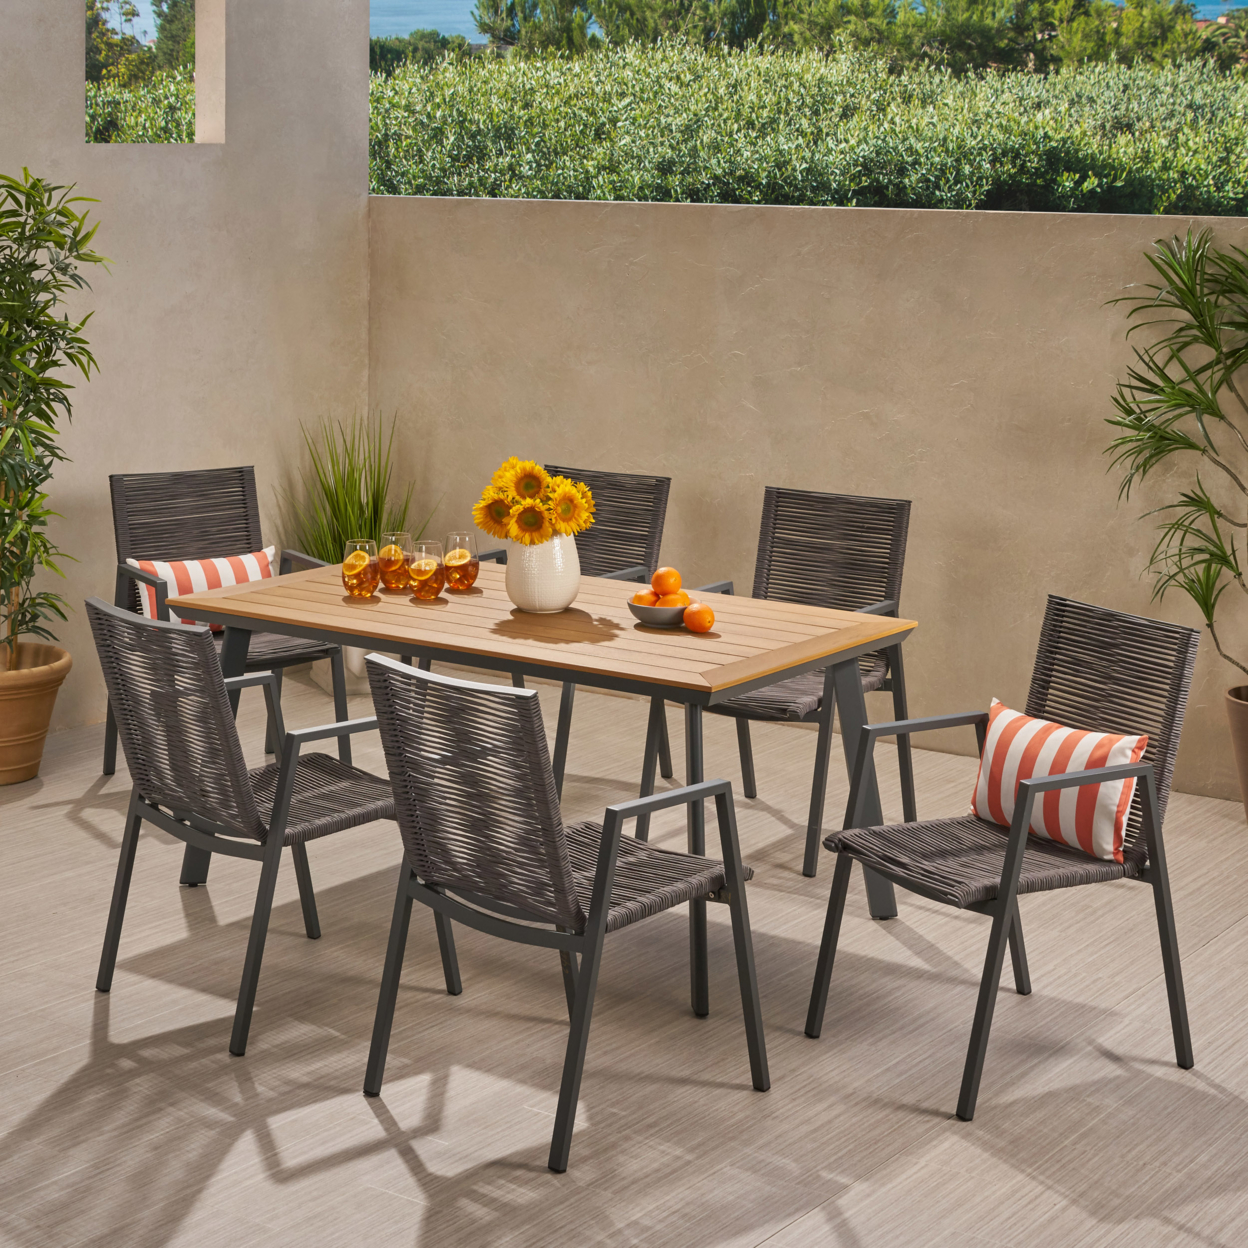 Yolanda Outdoor Modern 6 Seater Aluminum Dining Set With Faux Wood Table Top